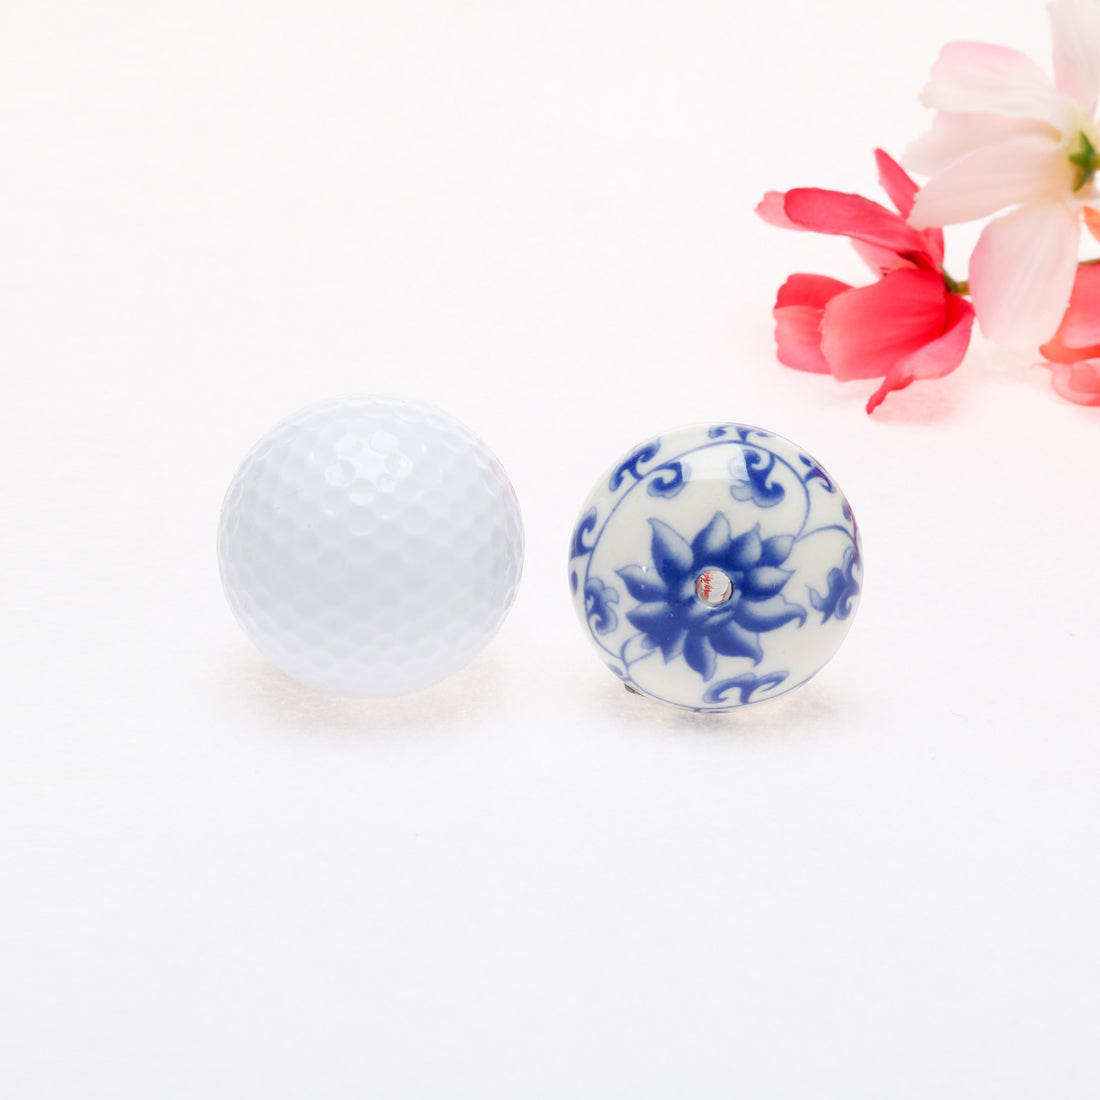 uxcell Uxcell 6 Pcs Ceramic Knobs Drawer Pulls Cupboard Handles Door Blue and White Flower